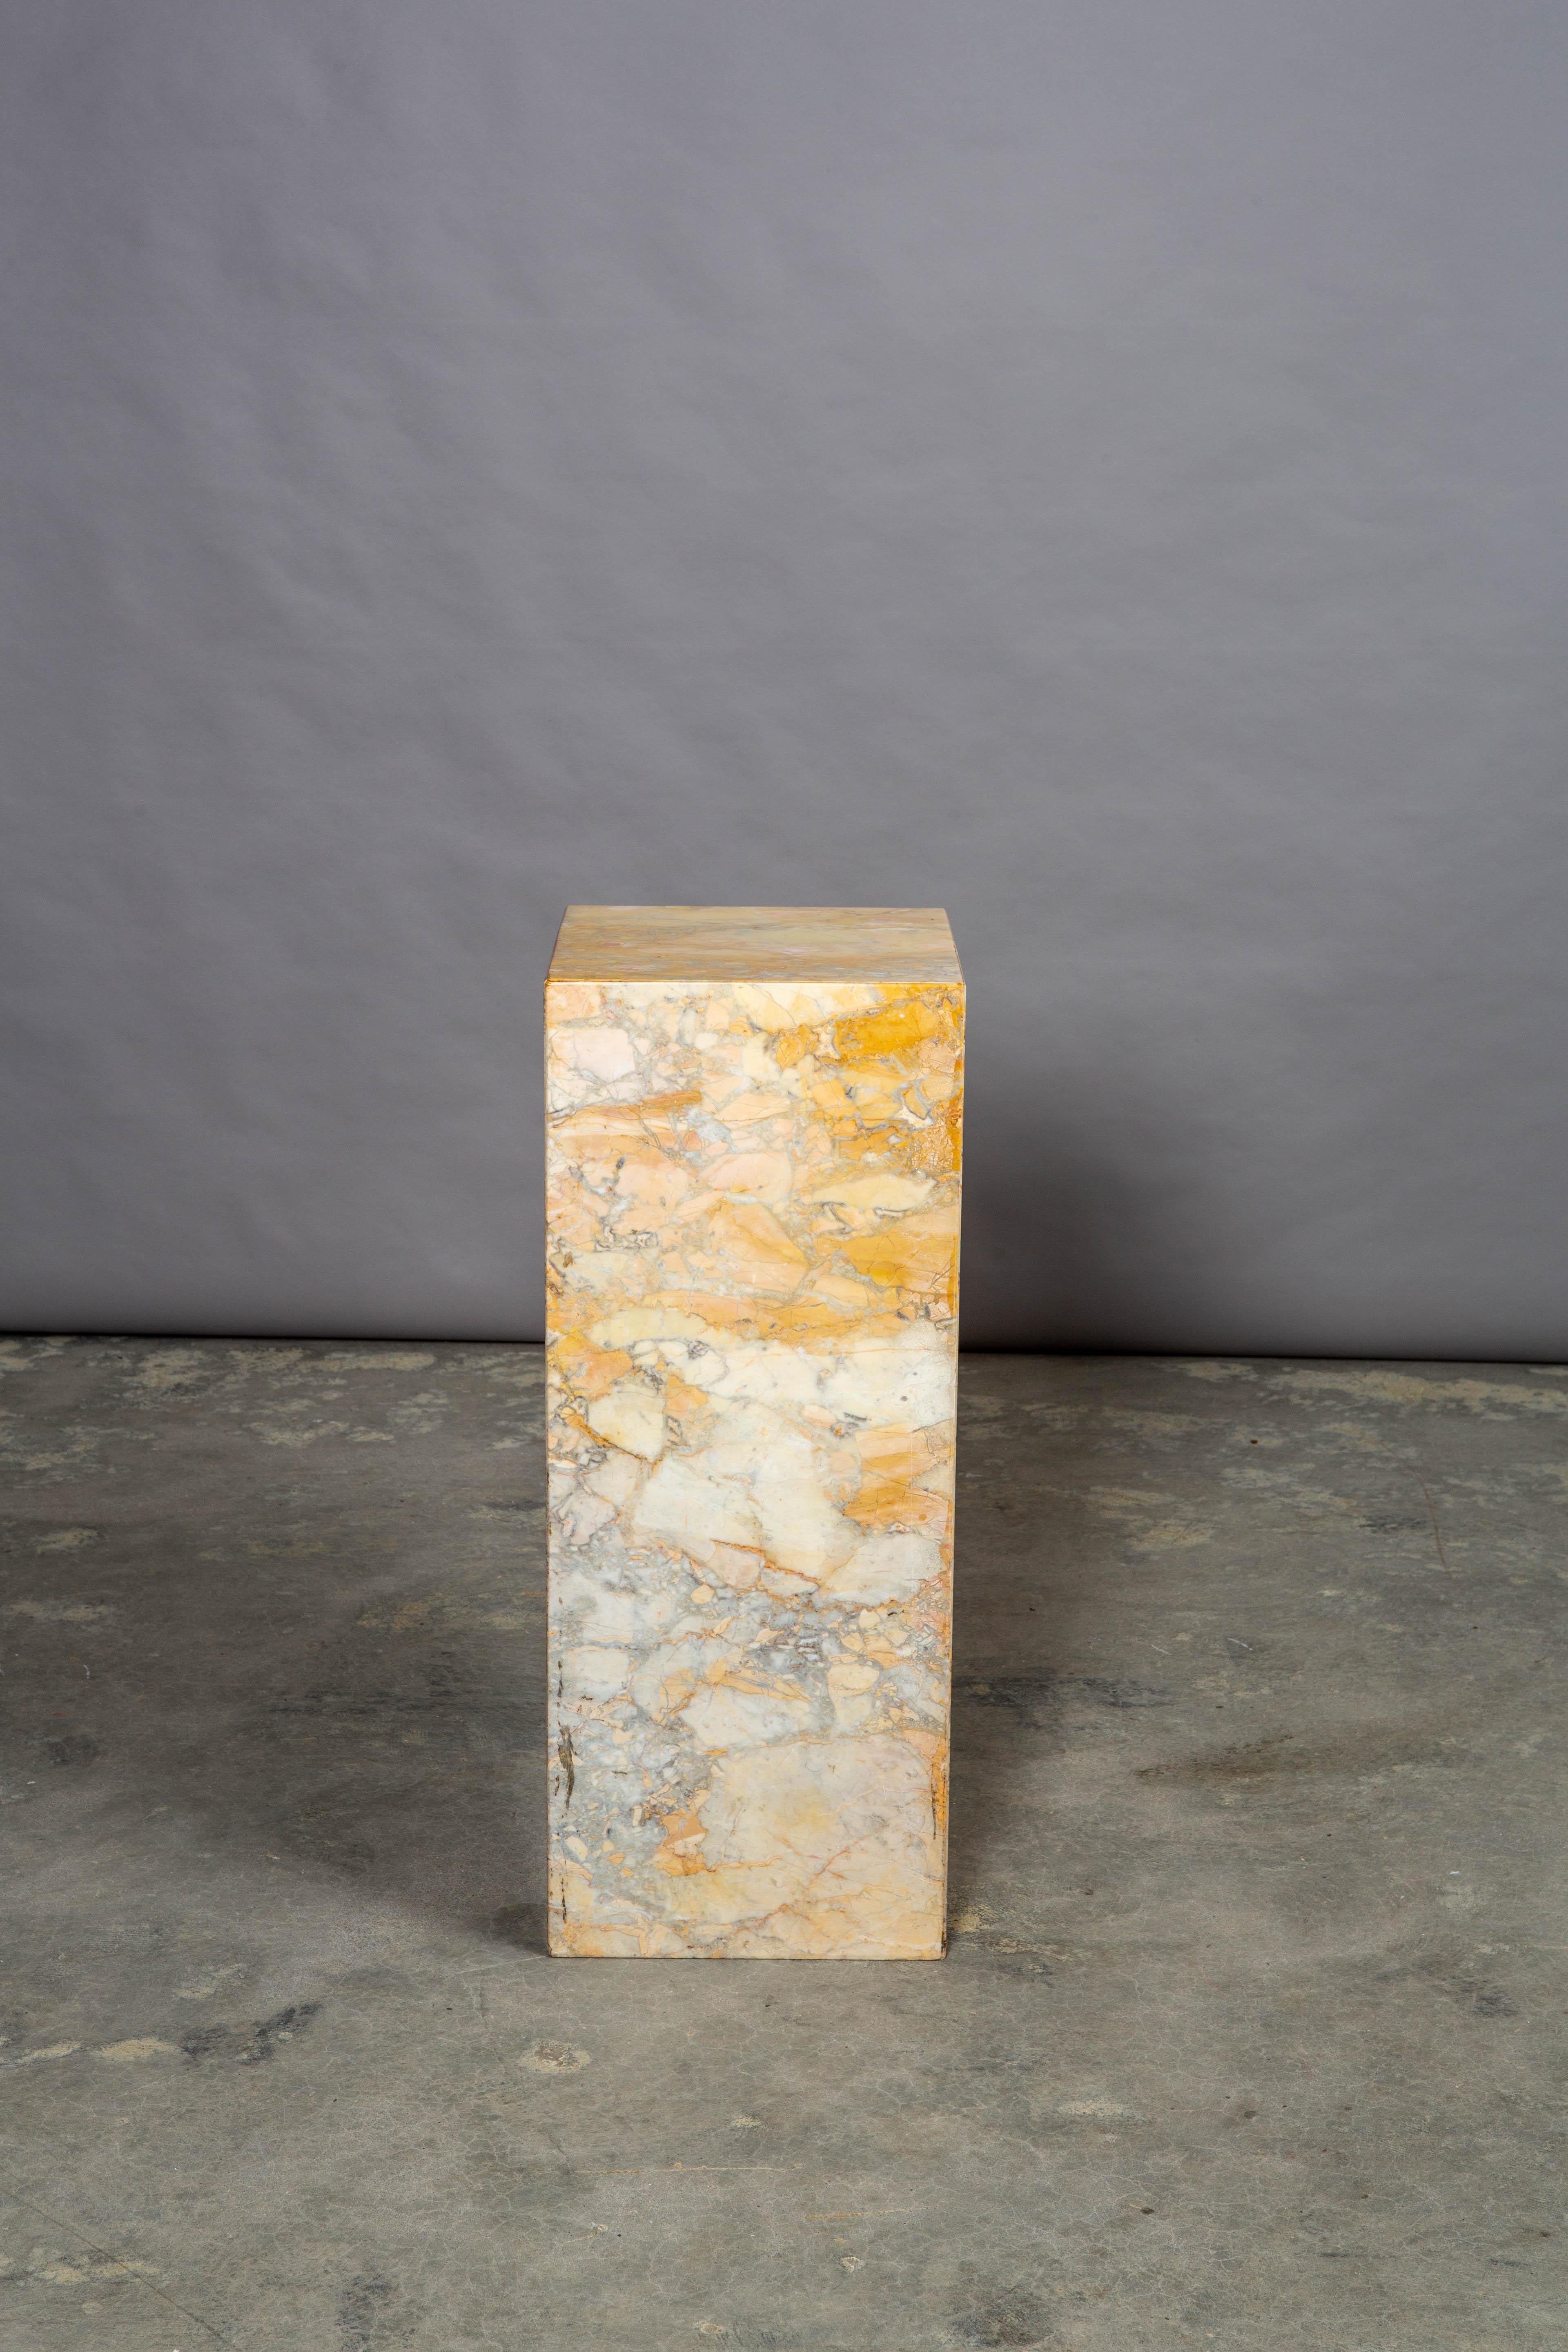 Mid-Century Modern Italian marble pedestal. Heavy and in very good condition, this pedestal has great color variation ranging from ochre to grey with great shades of tan and light browns. Very minor losses to the top edge but consistent with age.